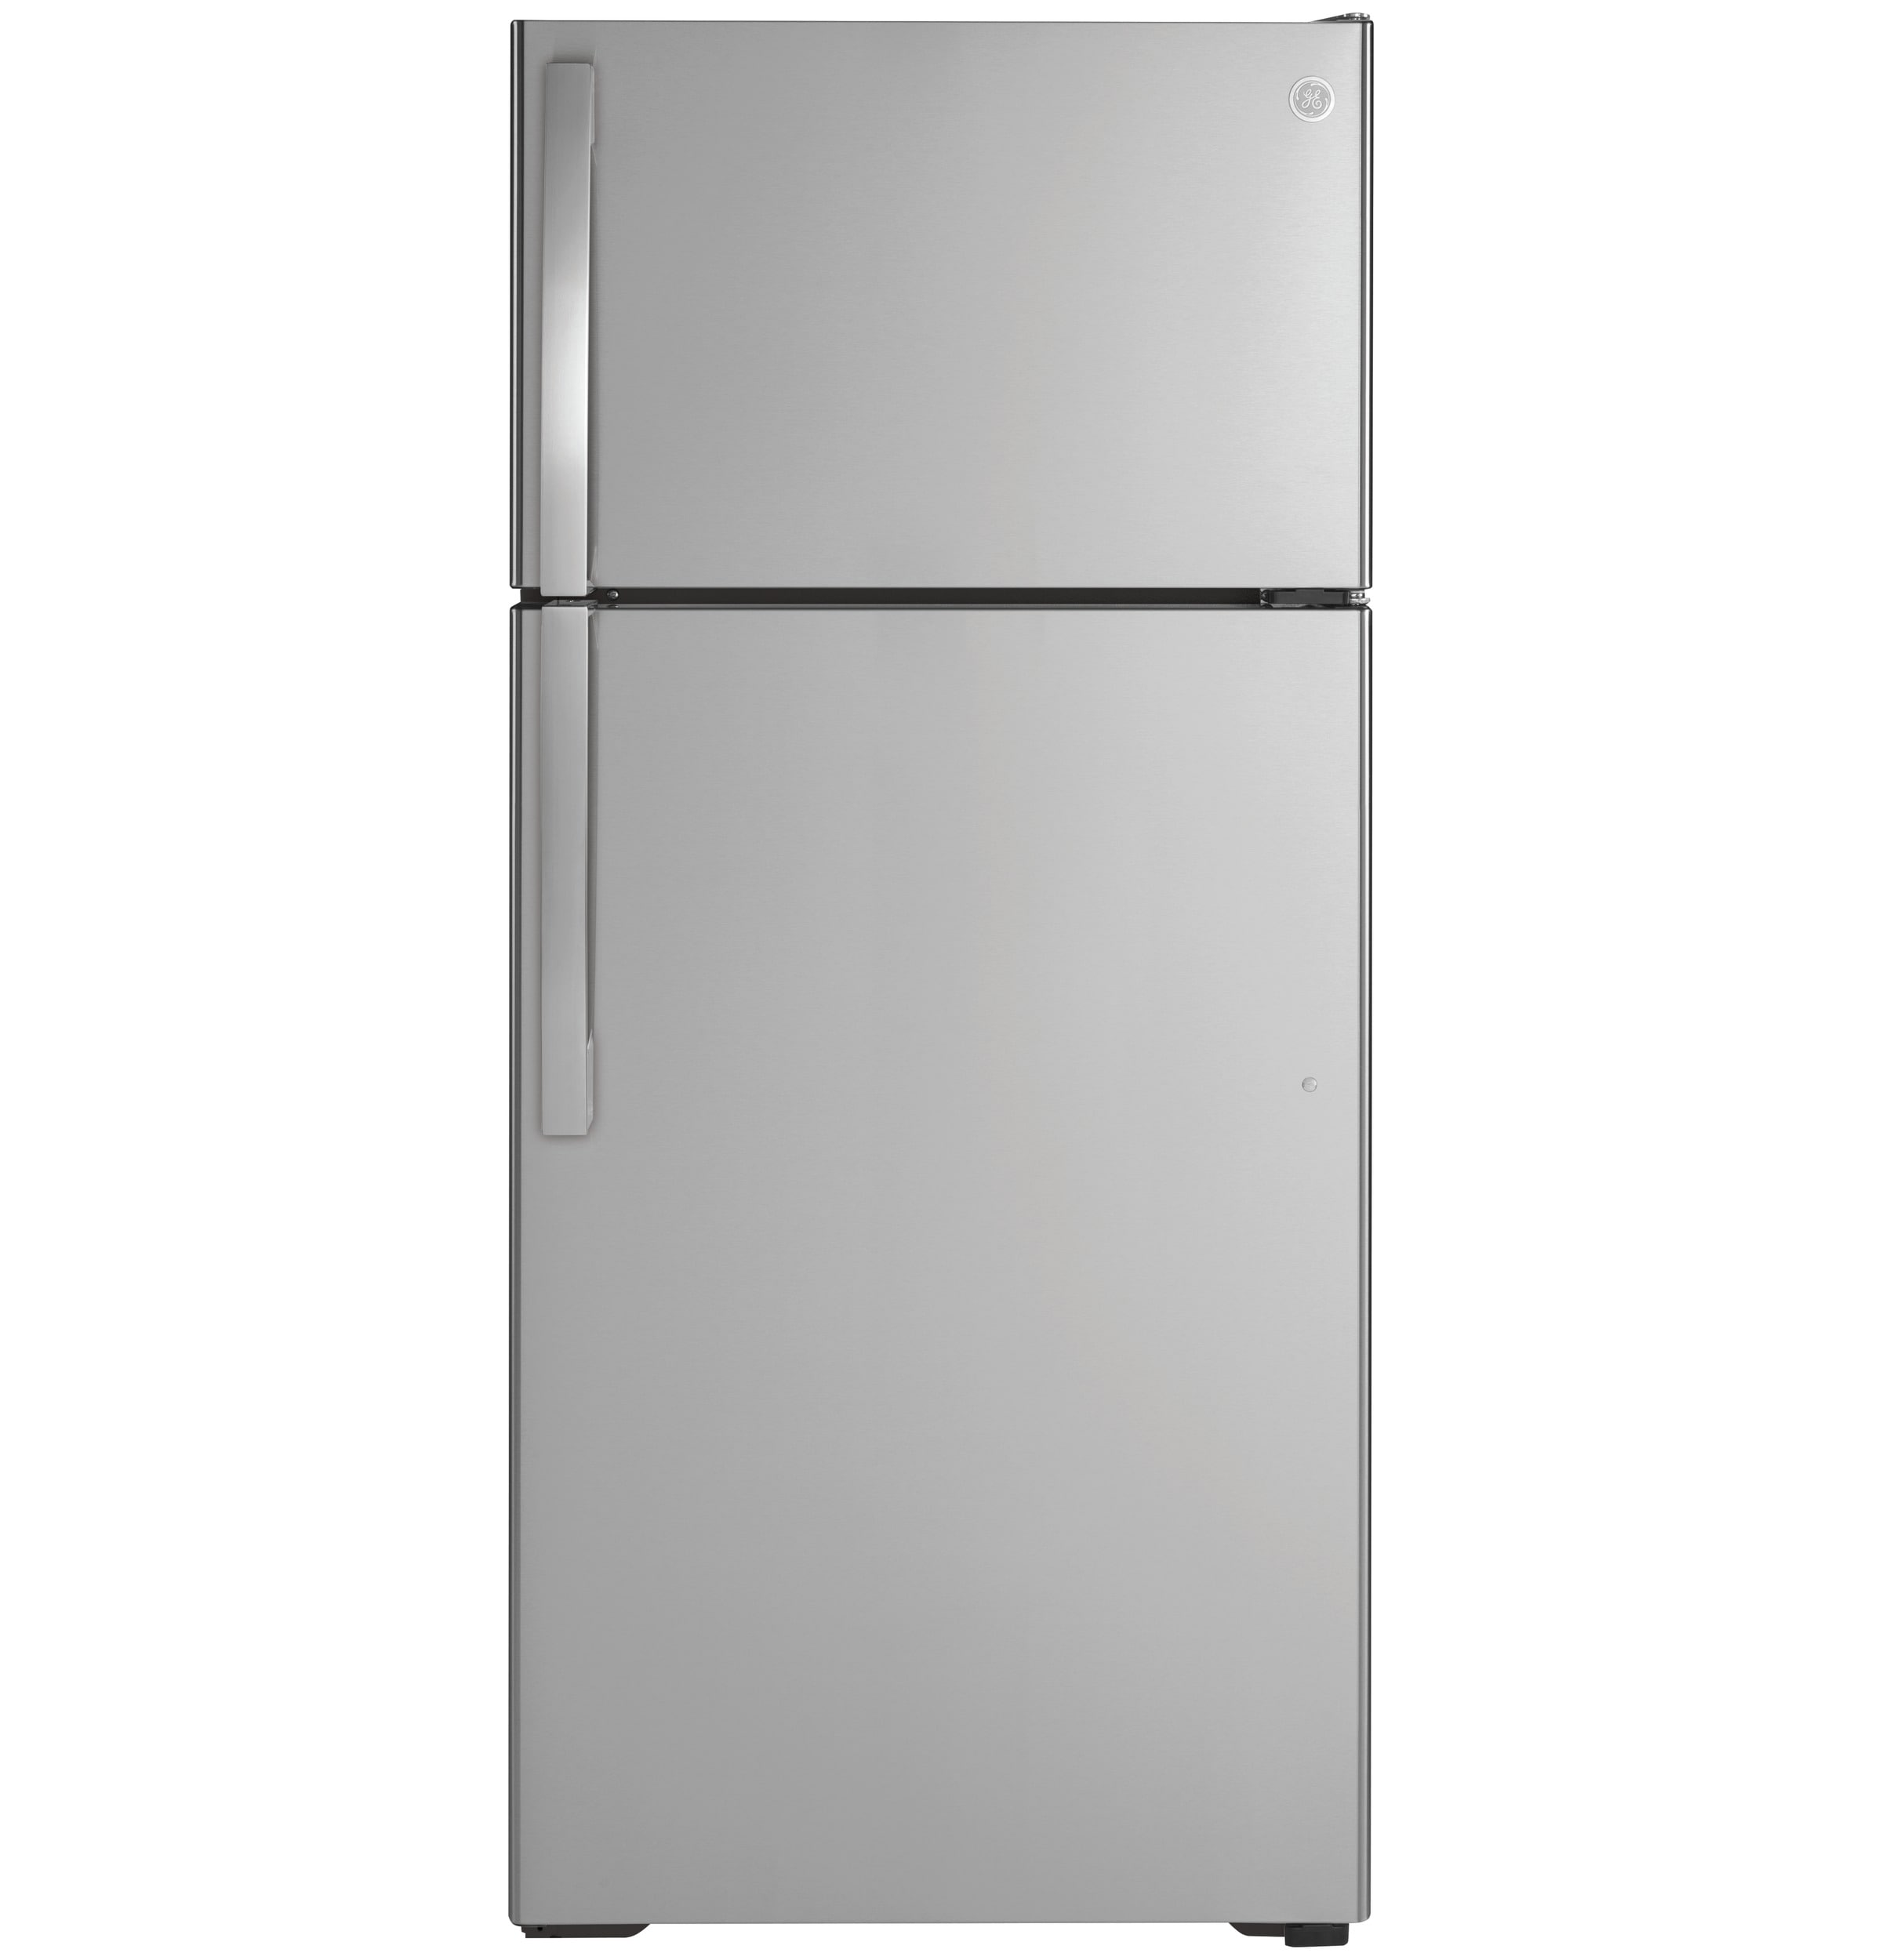 GE 16.6-cu ft Top-Freezer Refrigerator (Stainless Steel) in the Top ...